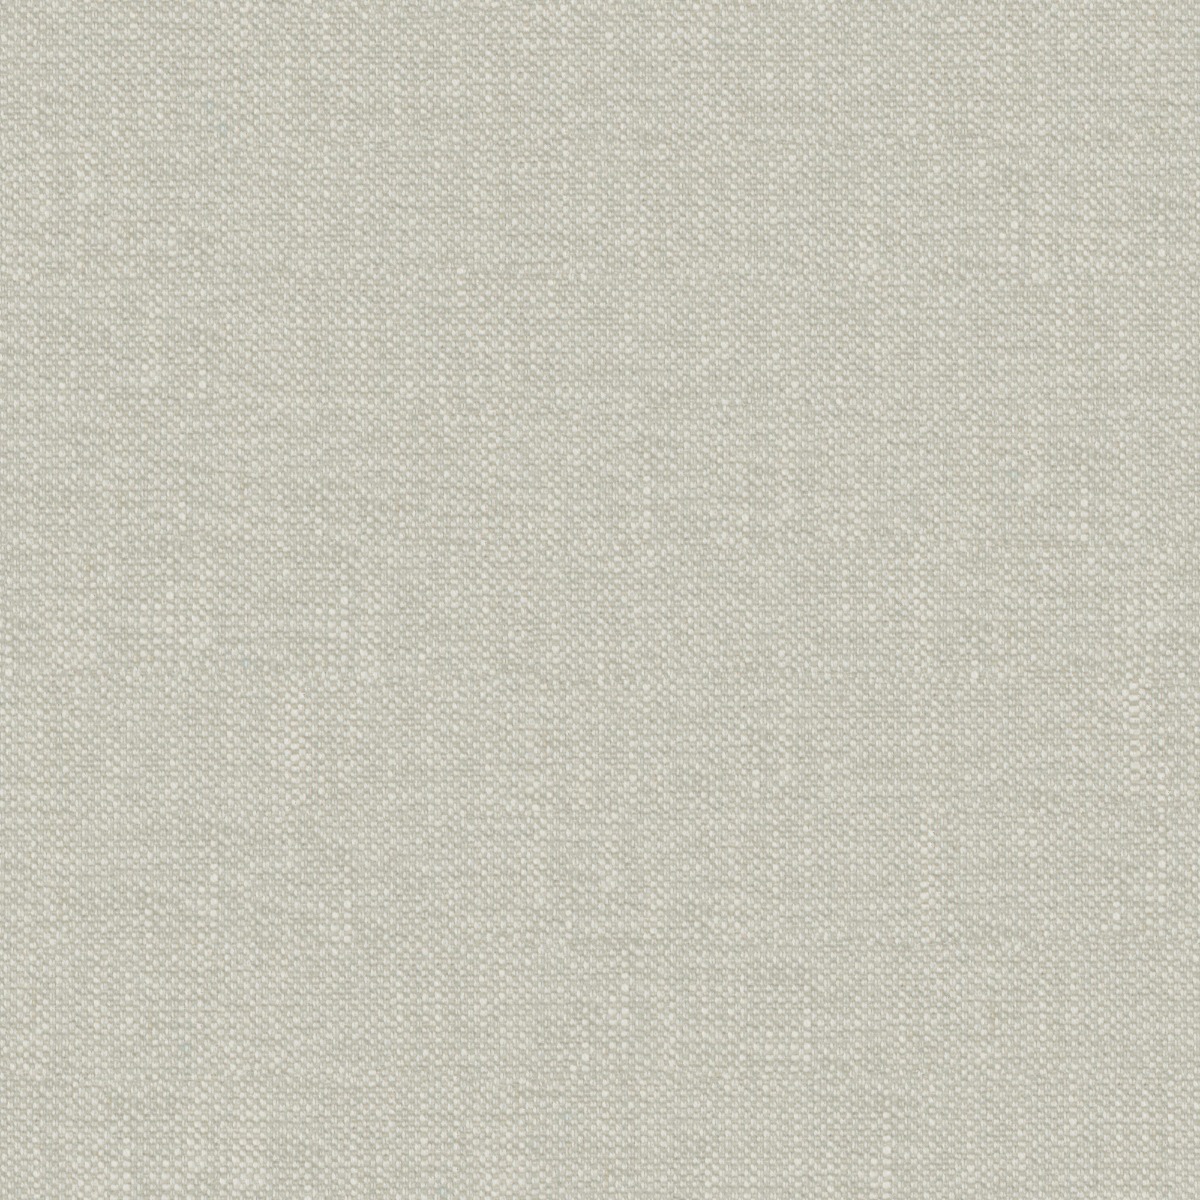 A seamless fabric texture with plain natural chenille units arranged in a None pattern